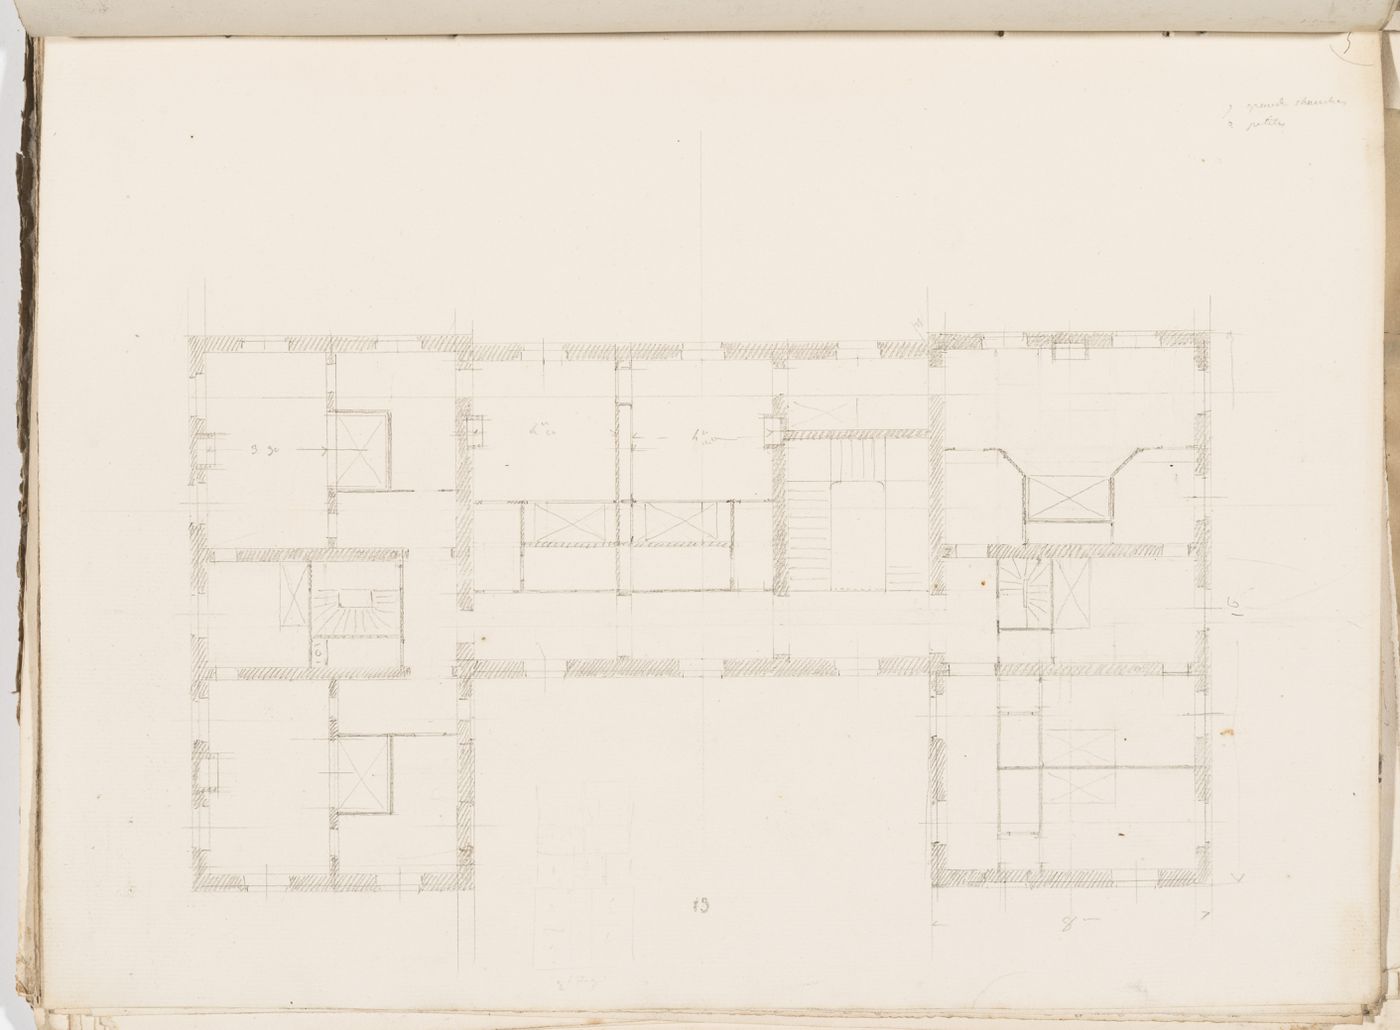 Project no. 5 for a country house for comte Treilhard: First floor plan